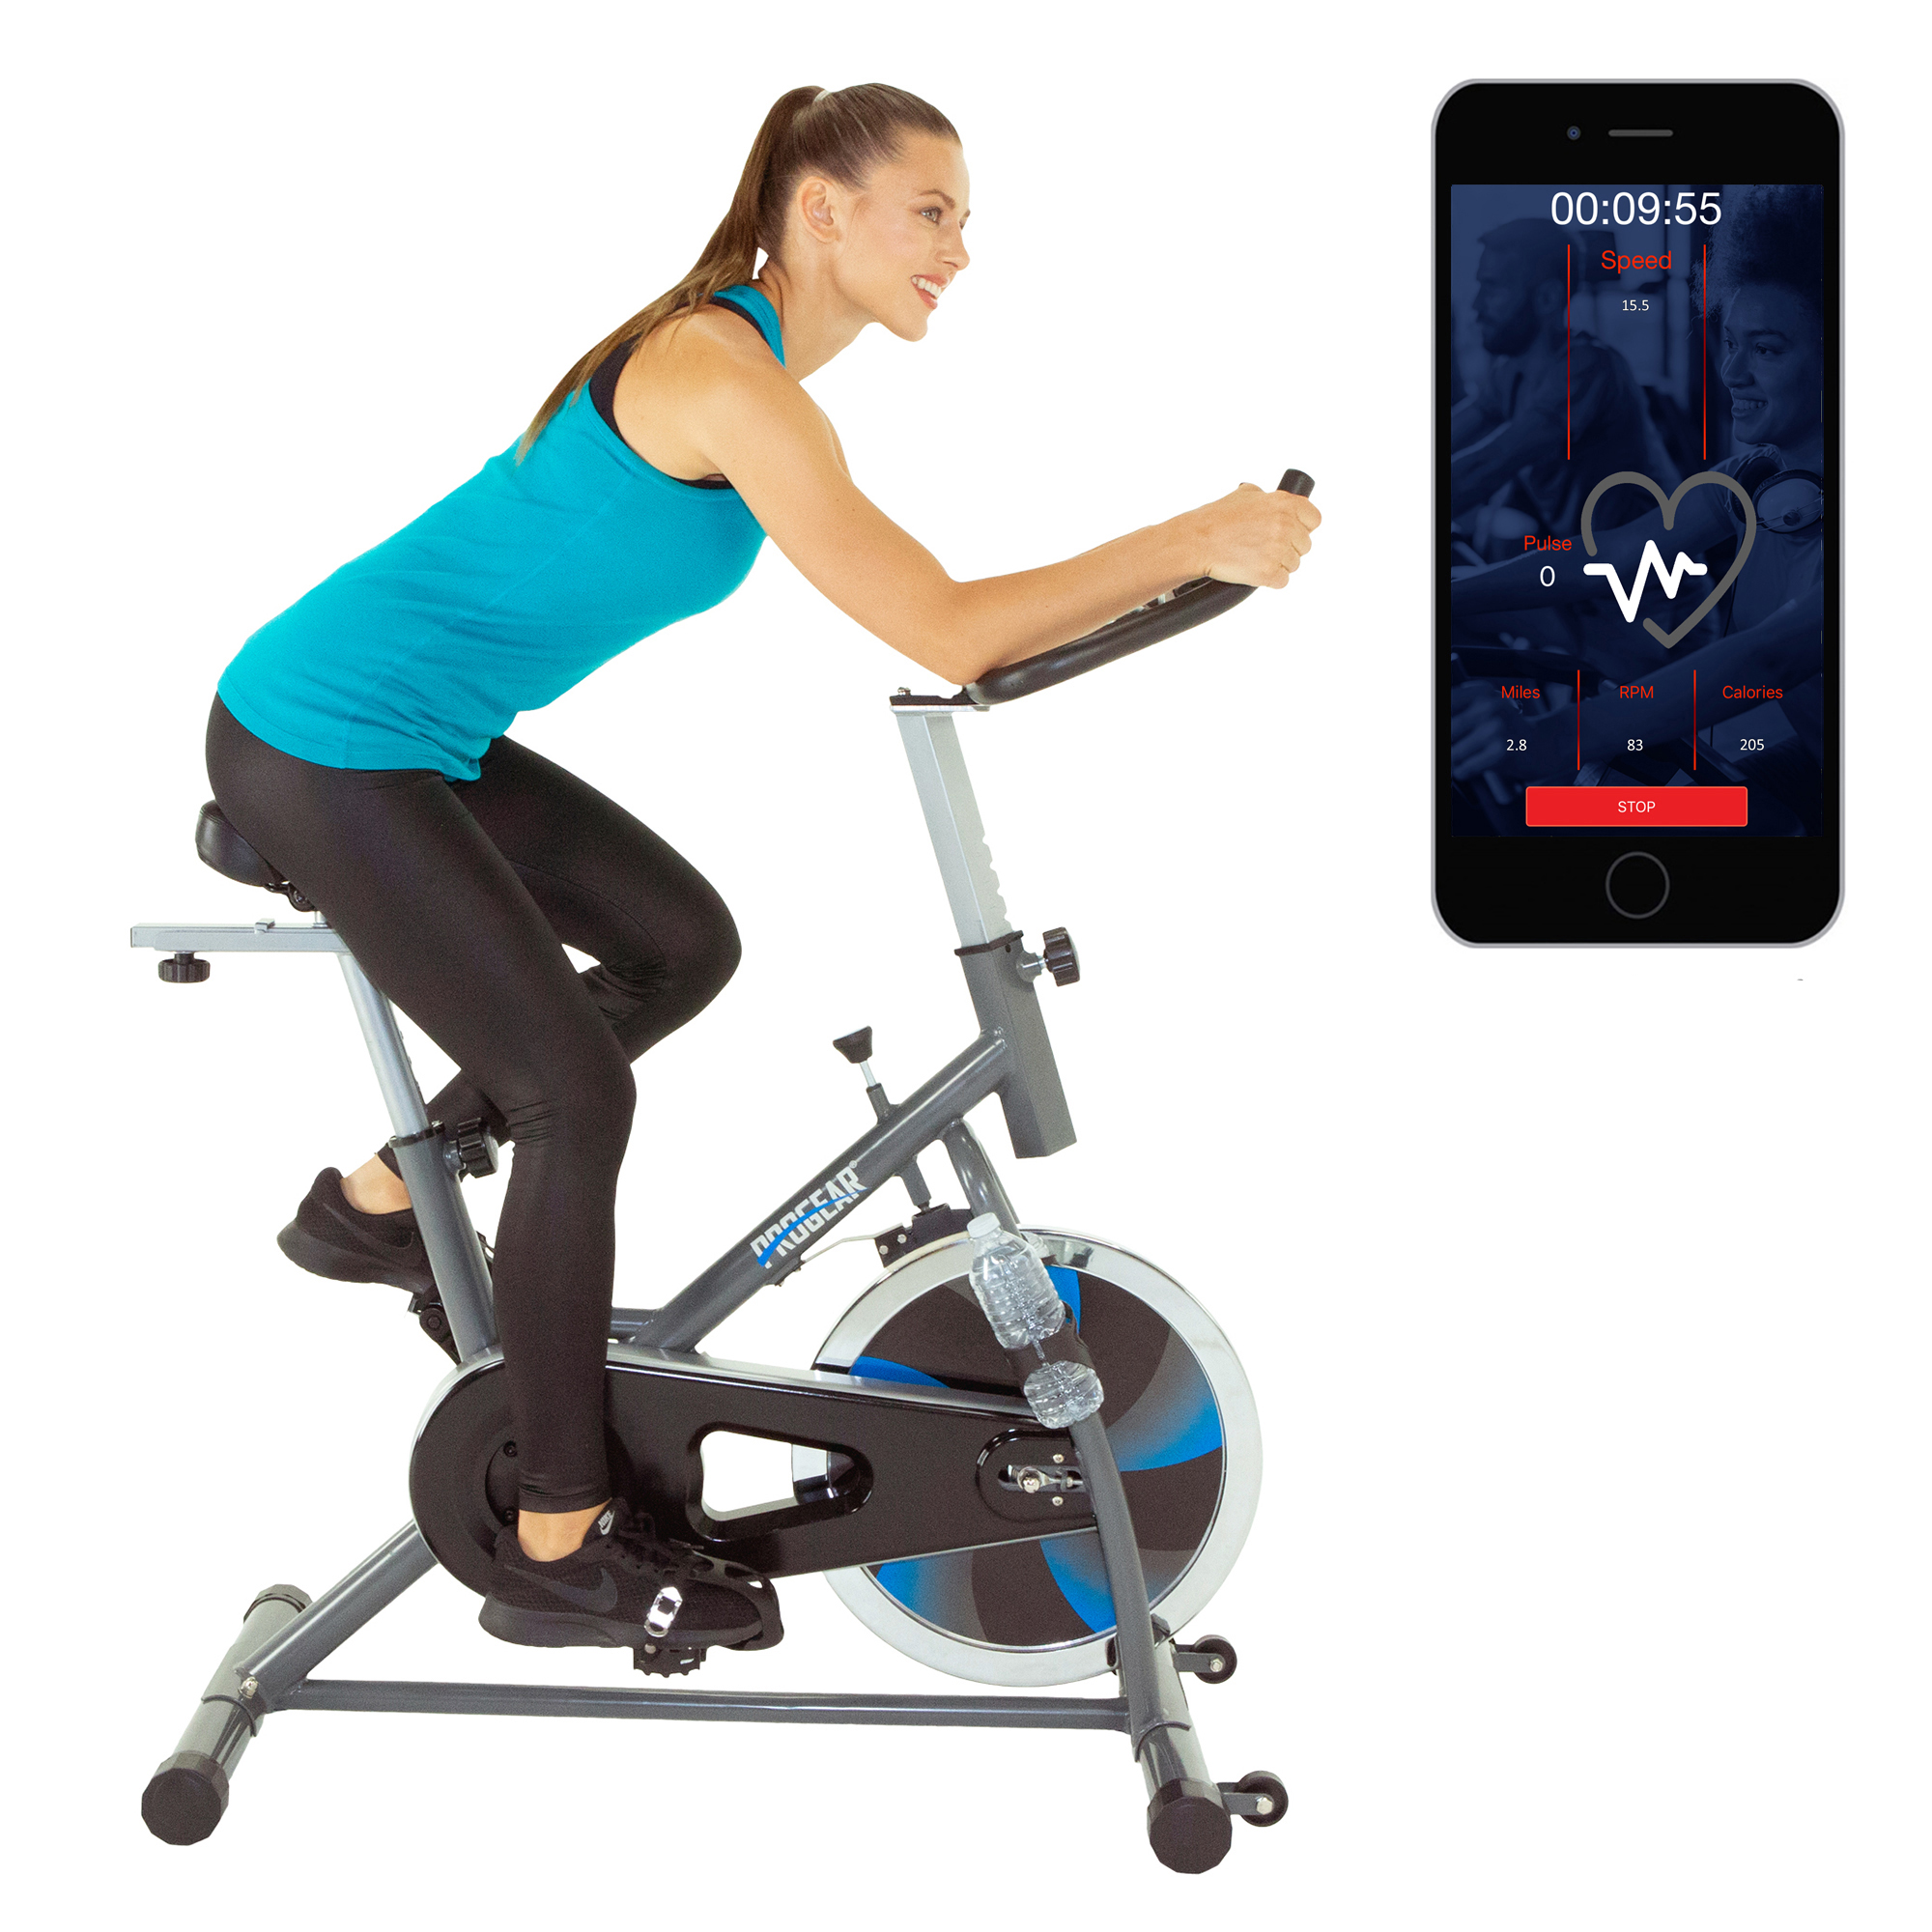 PROGEAR 300BT Exercise Bike/Indoor Training Cycle with Bluetooth Smart Technology and Free APP - image 1 of 25